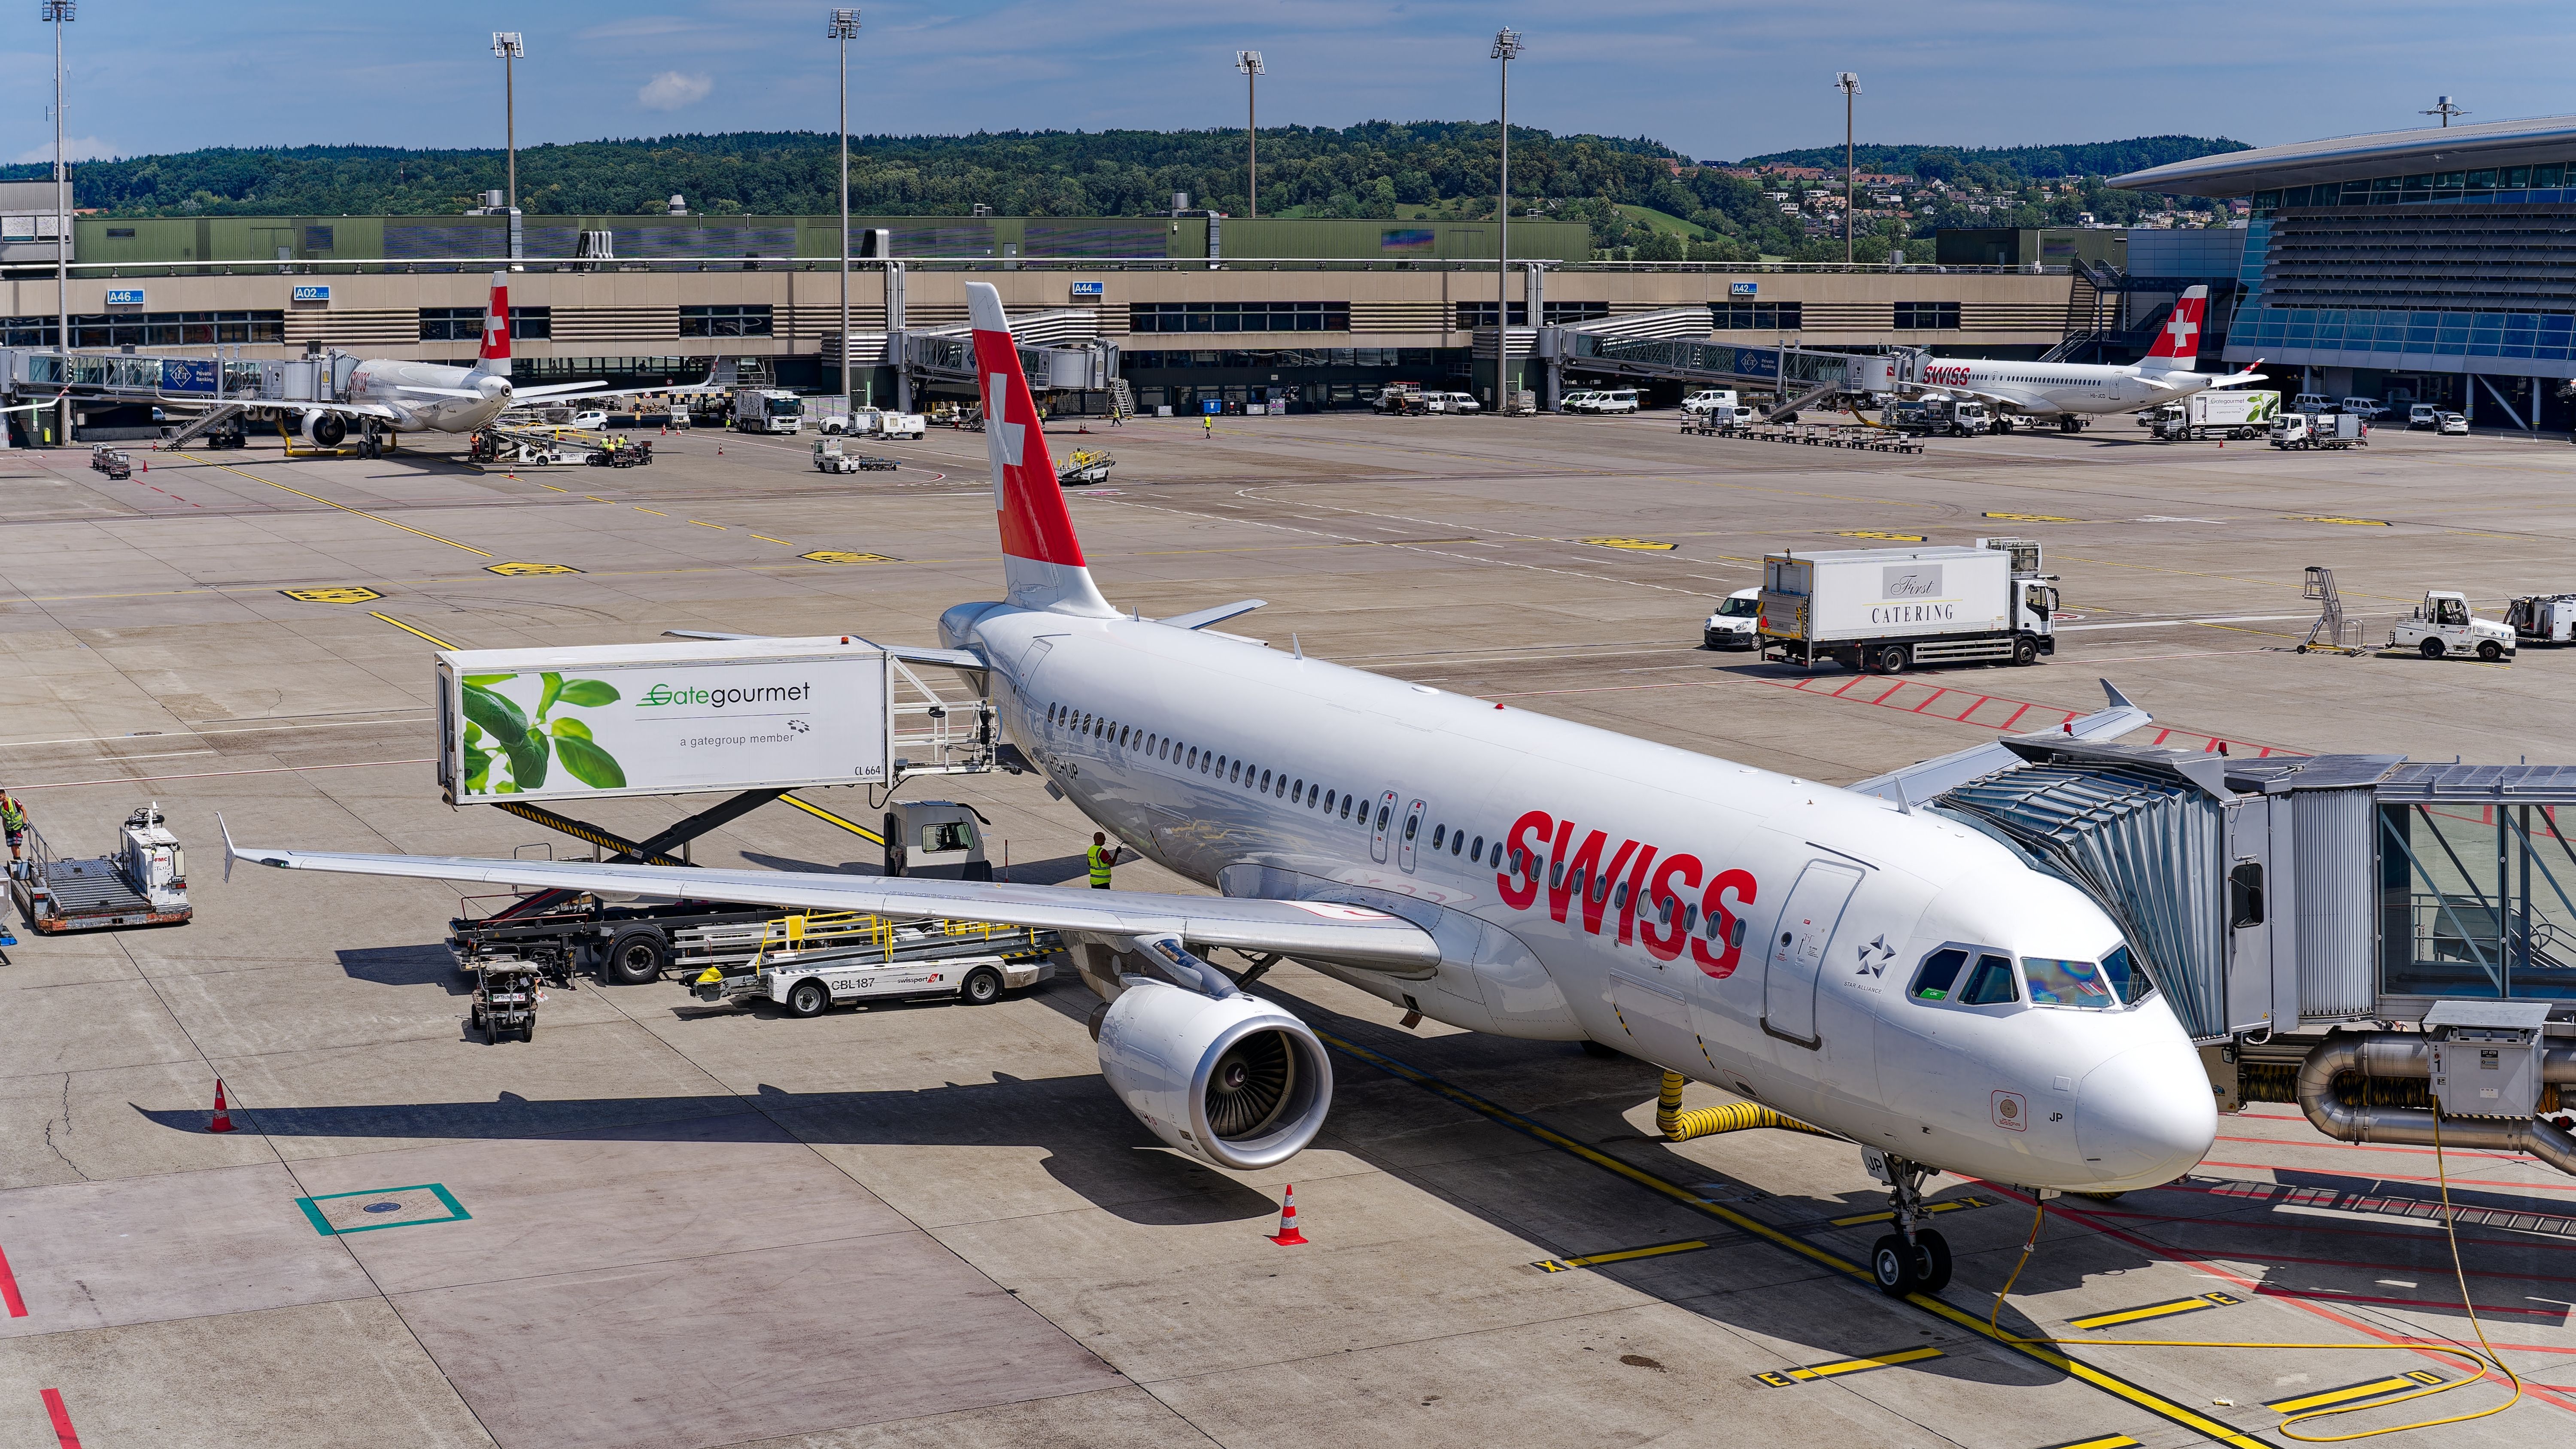 A Swiss aircraft parked with a catering truck parked next to it.